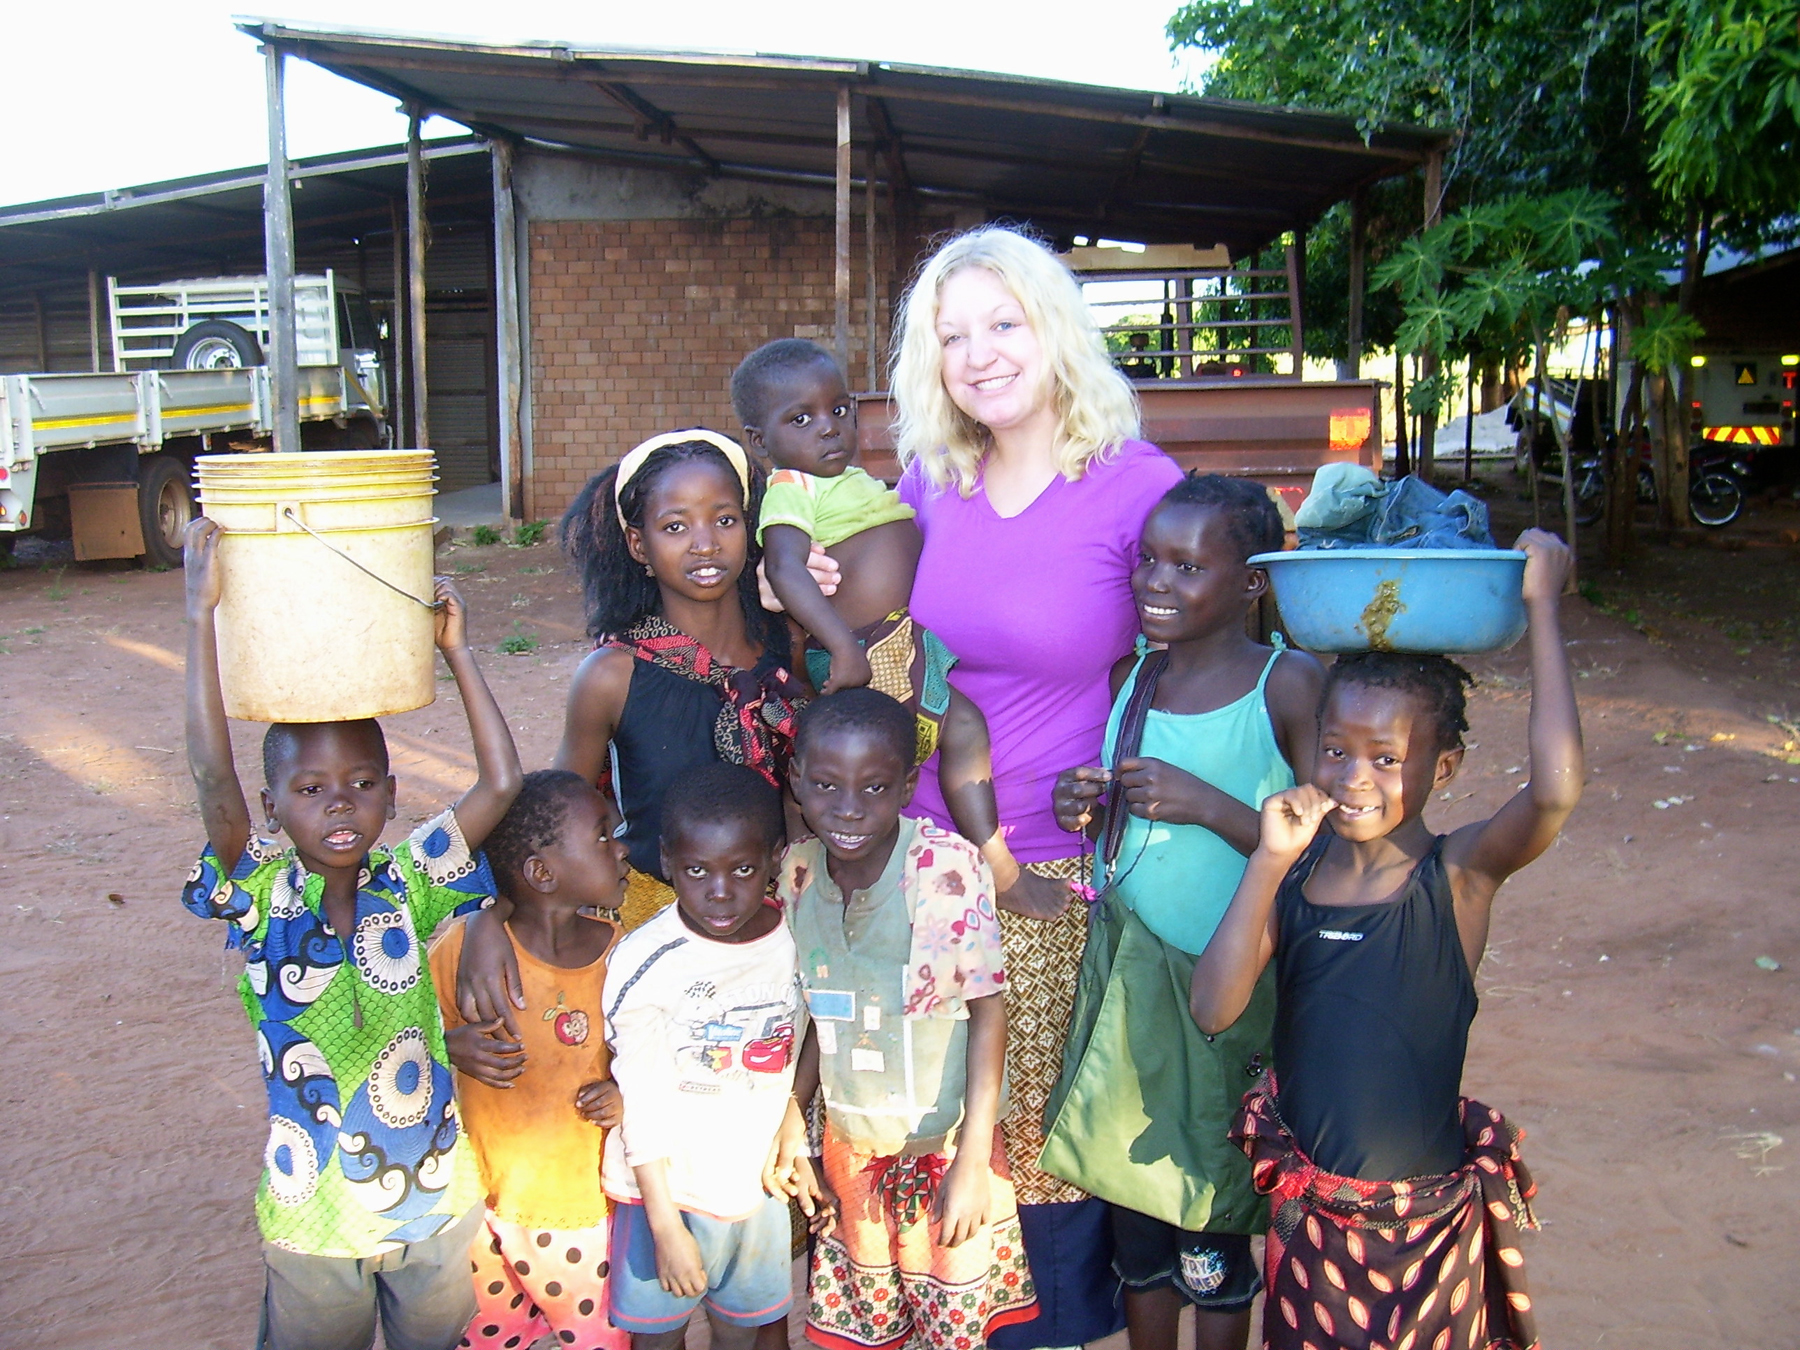 Open Brammer said the children she met in Mozambique were friendly and welcoming, and loved to have their picture taken.